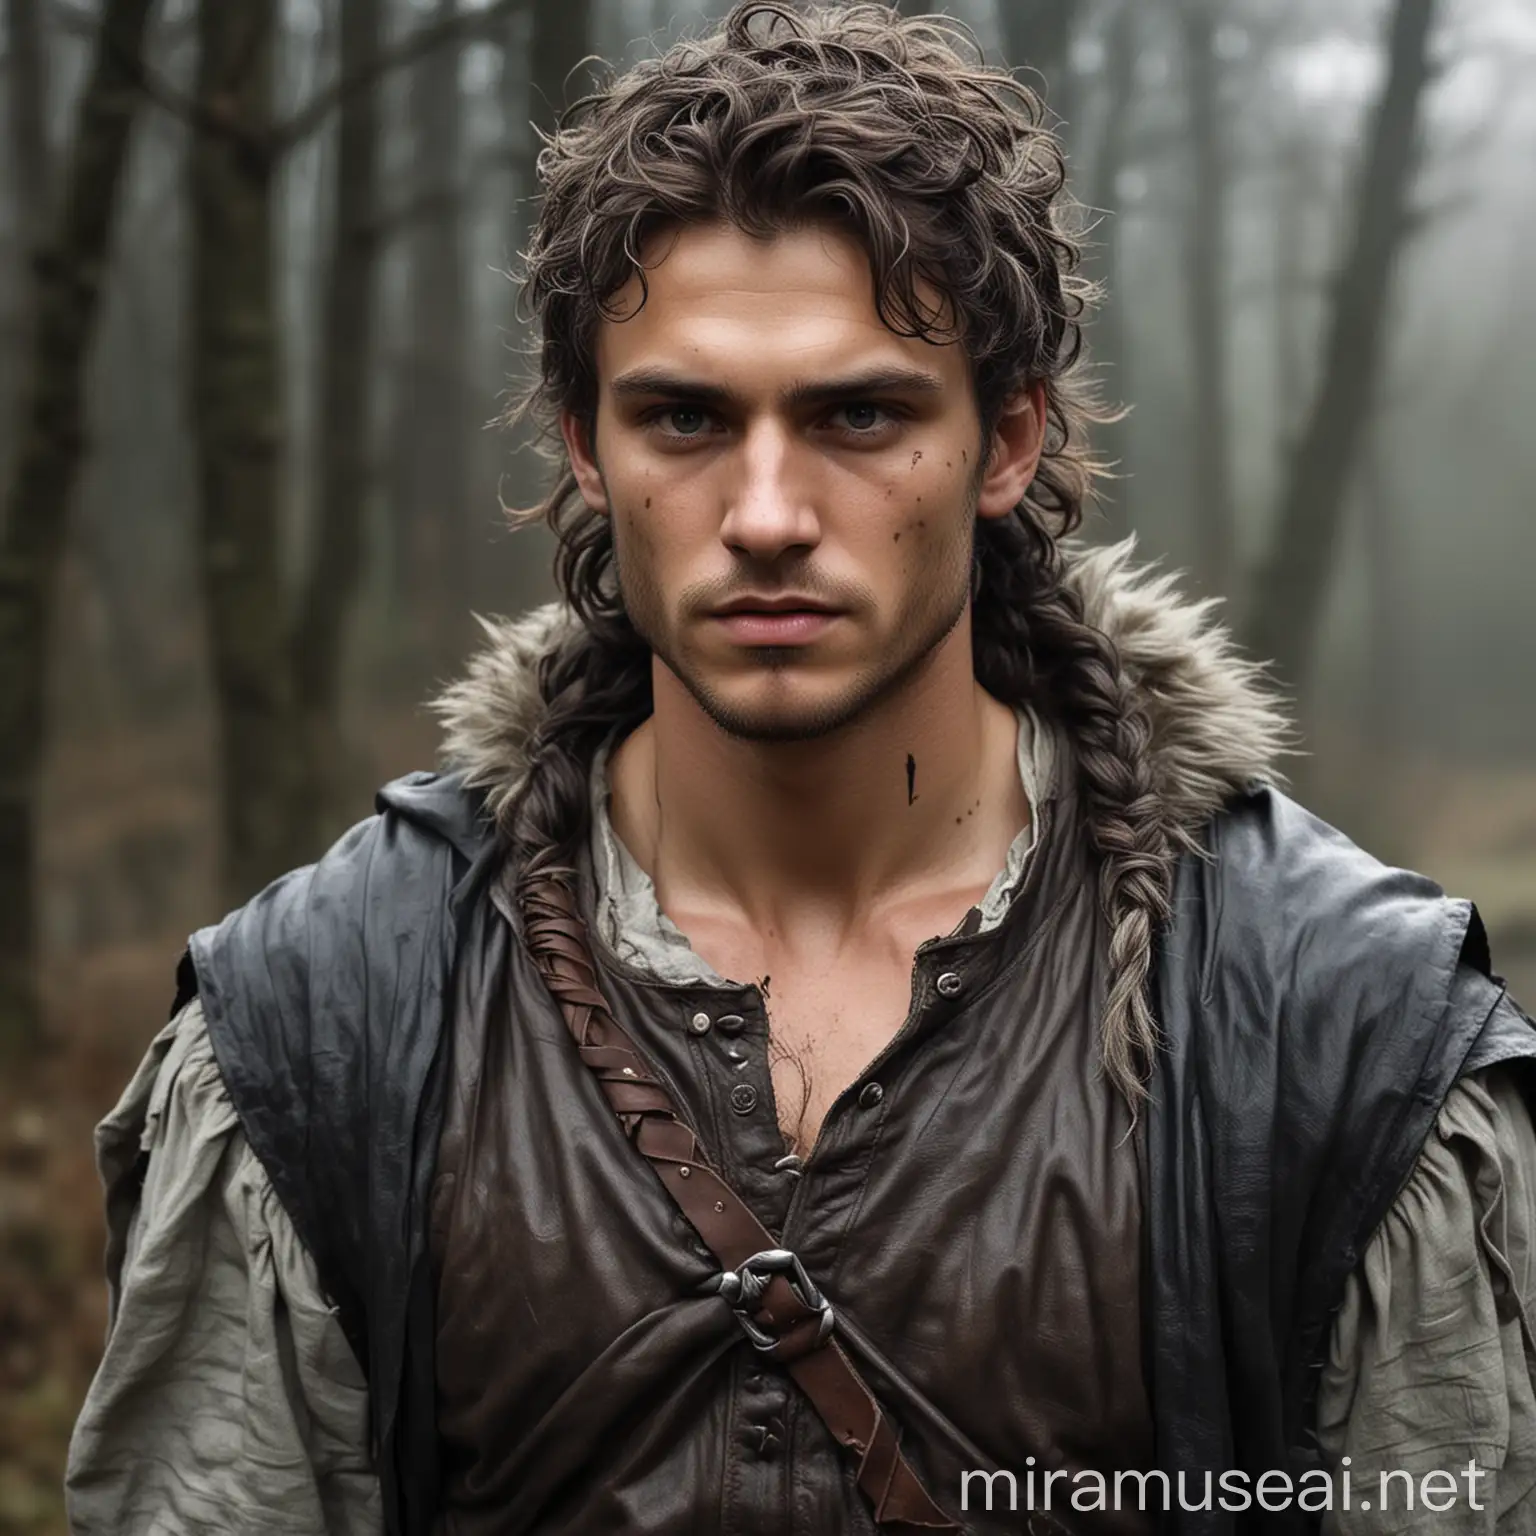 Create a character of a warrior man, in his mid twenties, with dark eye colour, scruffy hair with a braid tied in a leather strap, he is broad and strong with thicker arms, broader shoulders, angular face, he wears muddied clothes with a grey cloak, add a big white wolf next to him.